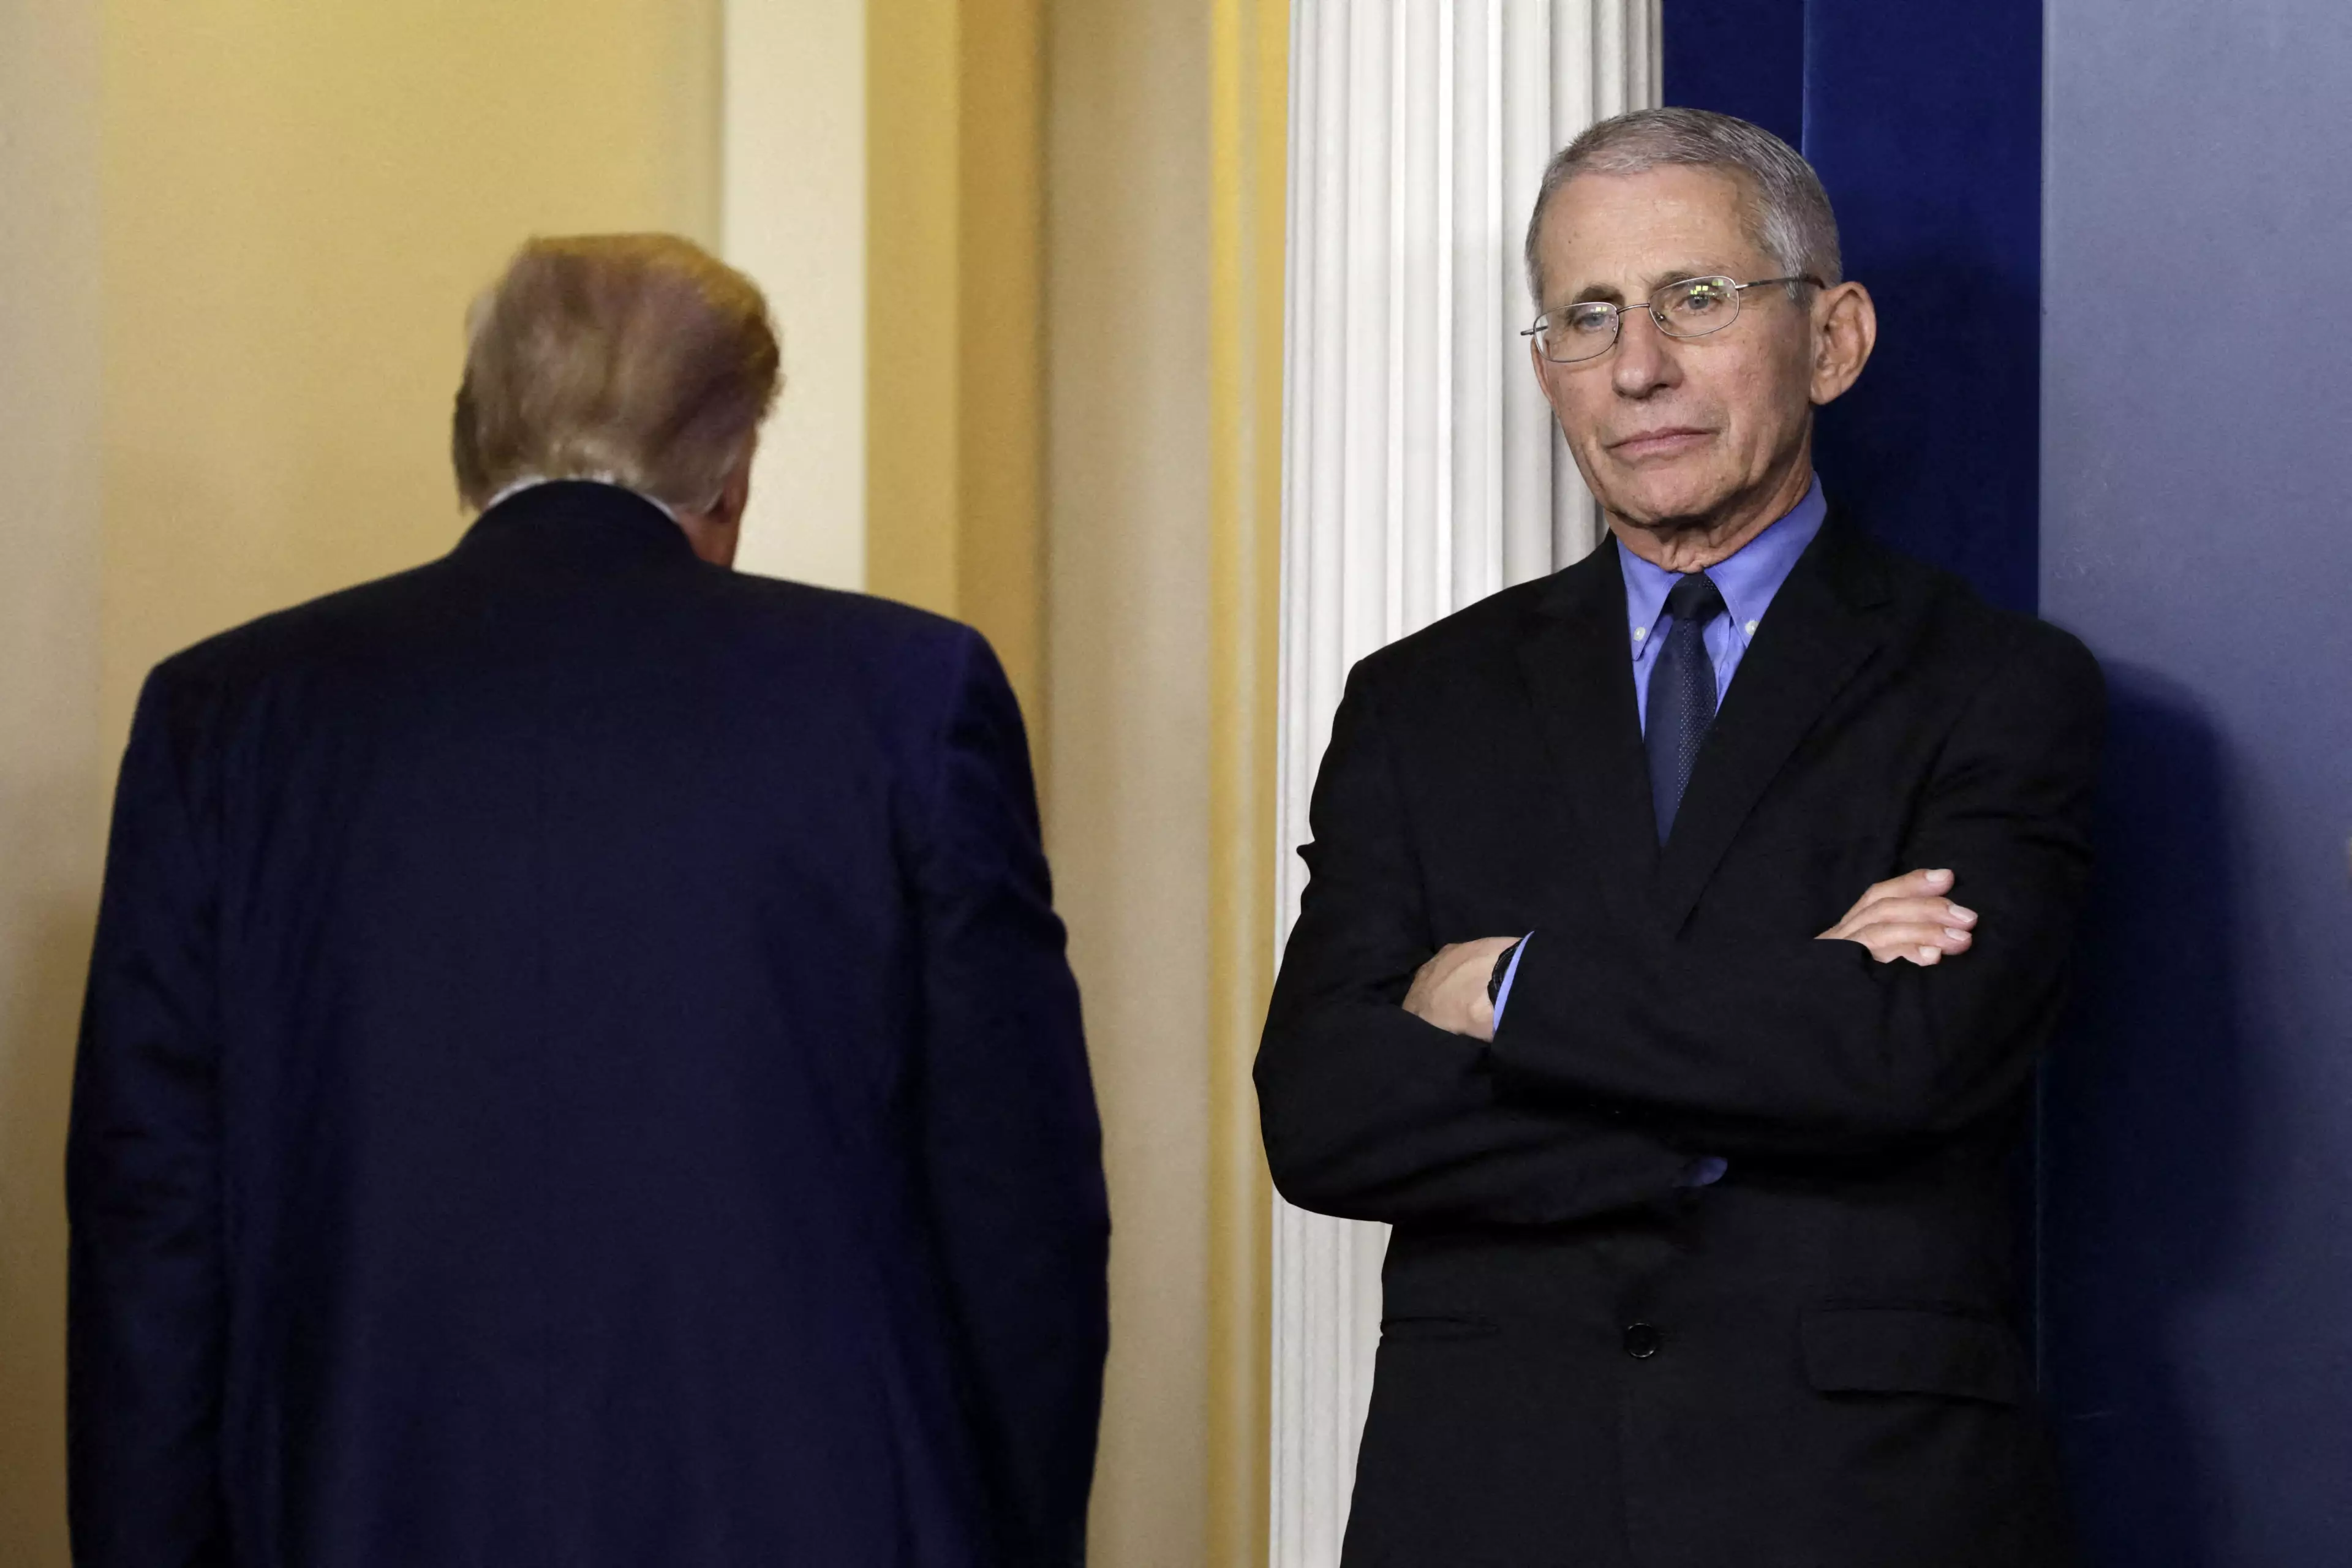 Fauci and Trump regularly contradicted each other.